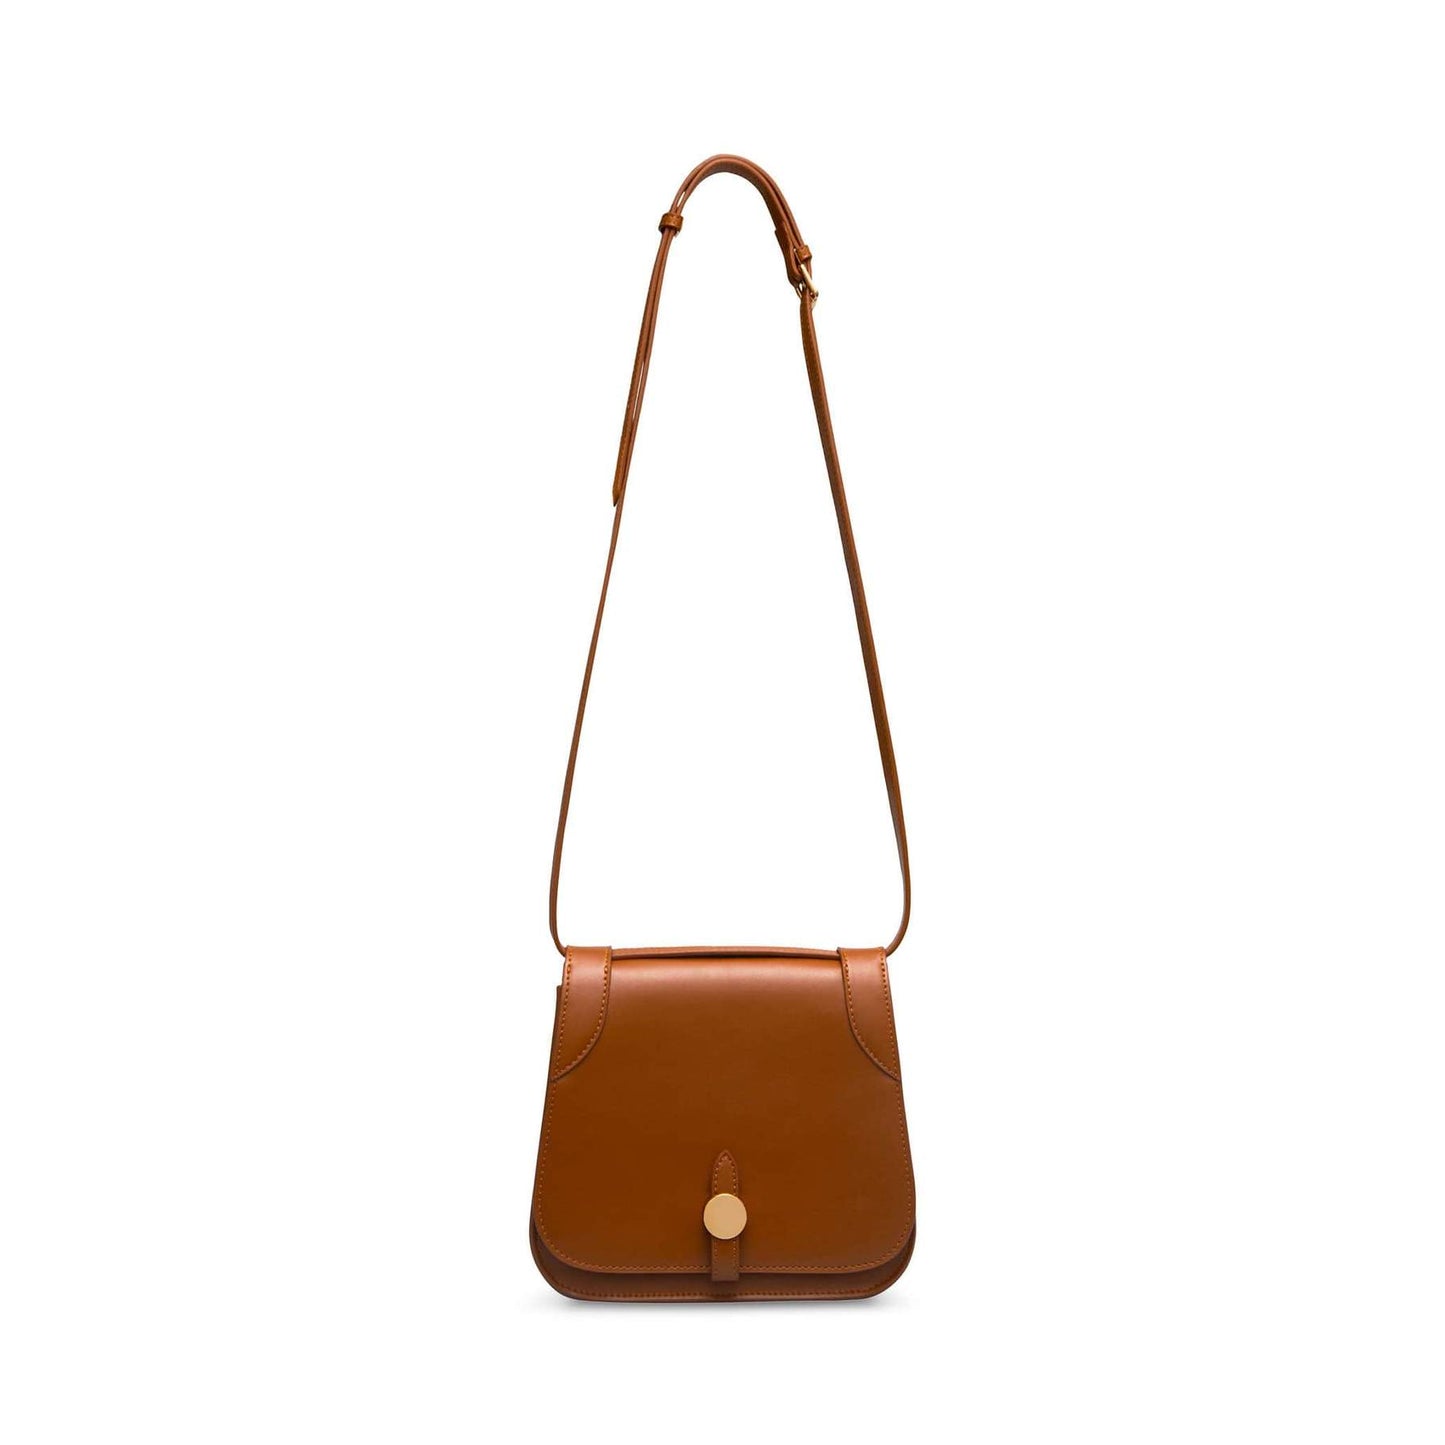 X NIHILO - SOLESTE LEATHER SHOULDER BAG -TAN Front view with strap